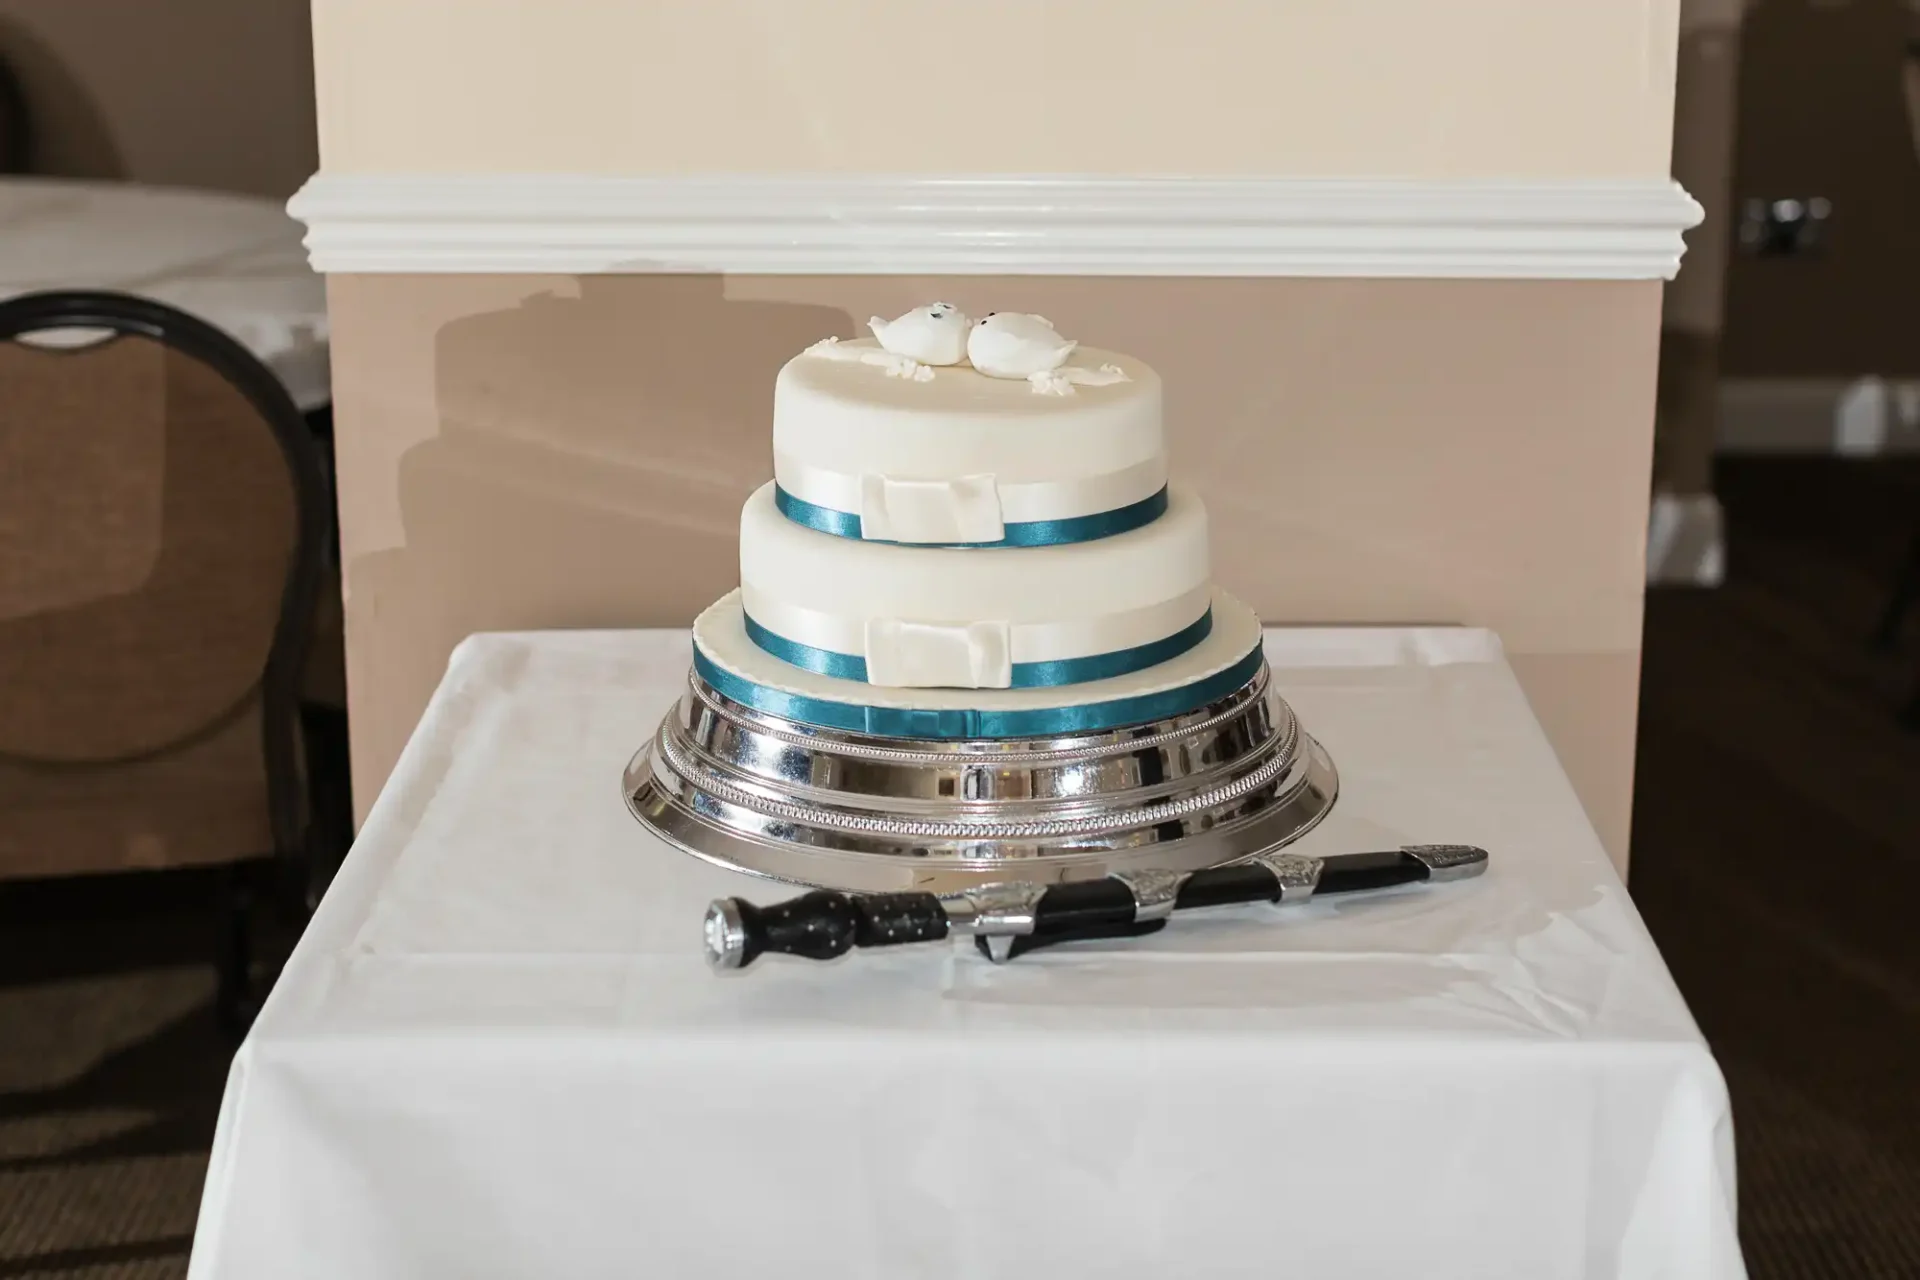 A three-tiered wedding cake with white and blue stripes, topped with two white birds, displayed on a silver stand with a cake knife beside it.